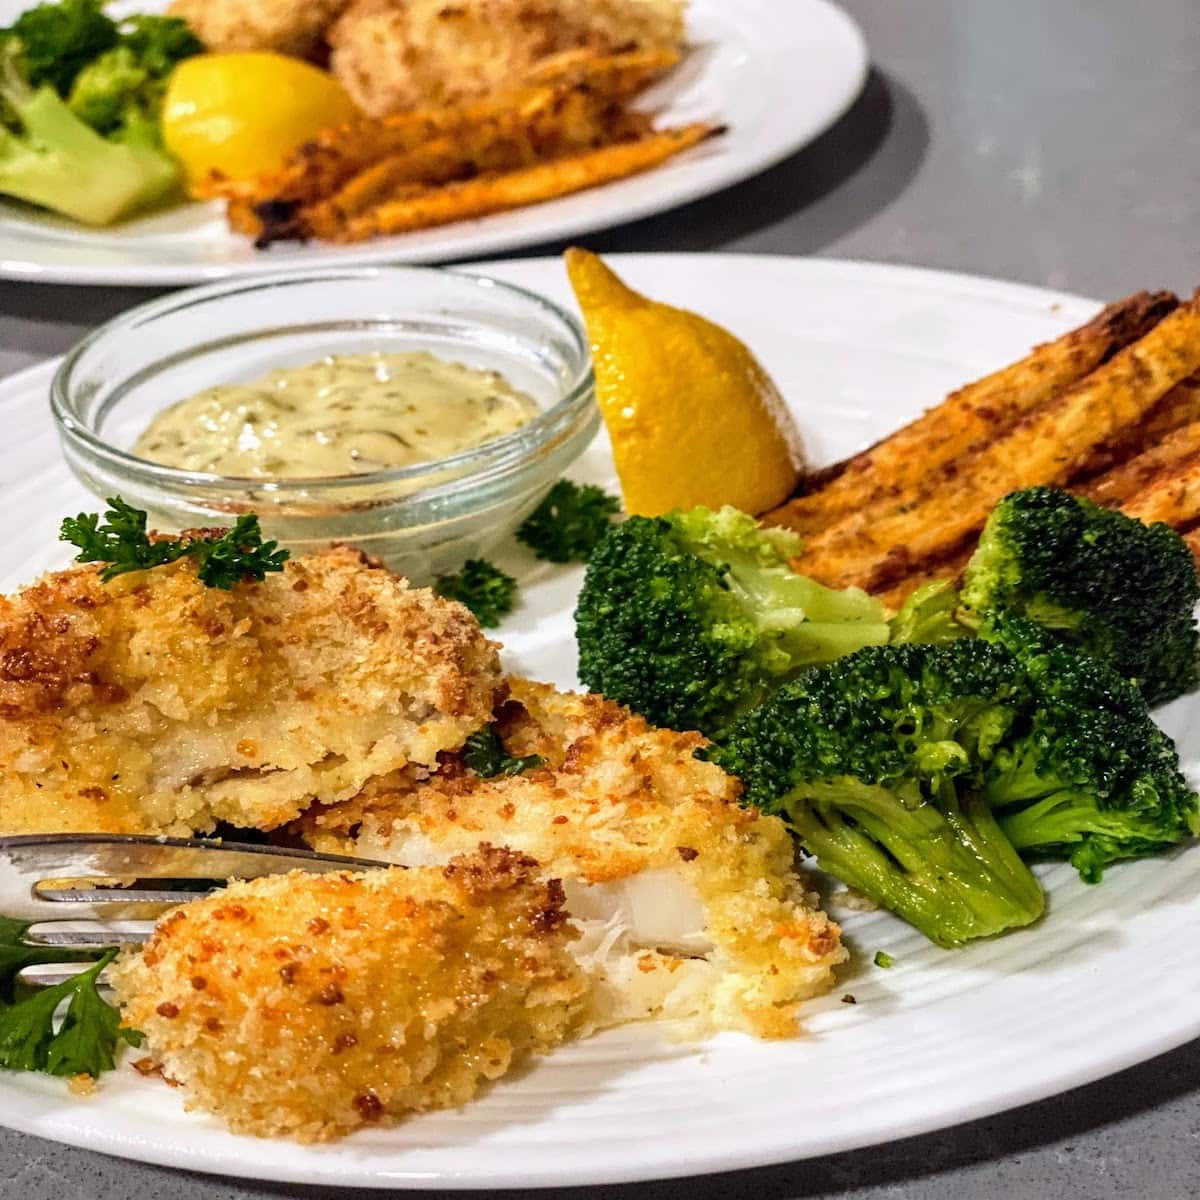 baked white fish with lemon, broccoli and fries